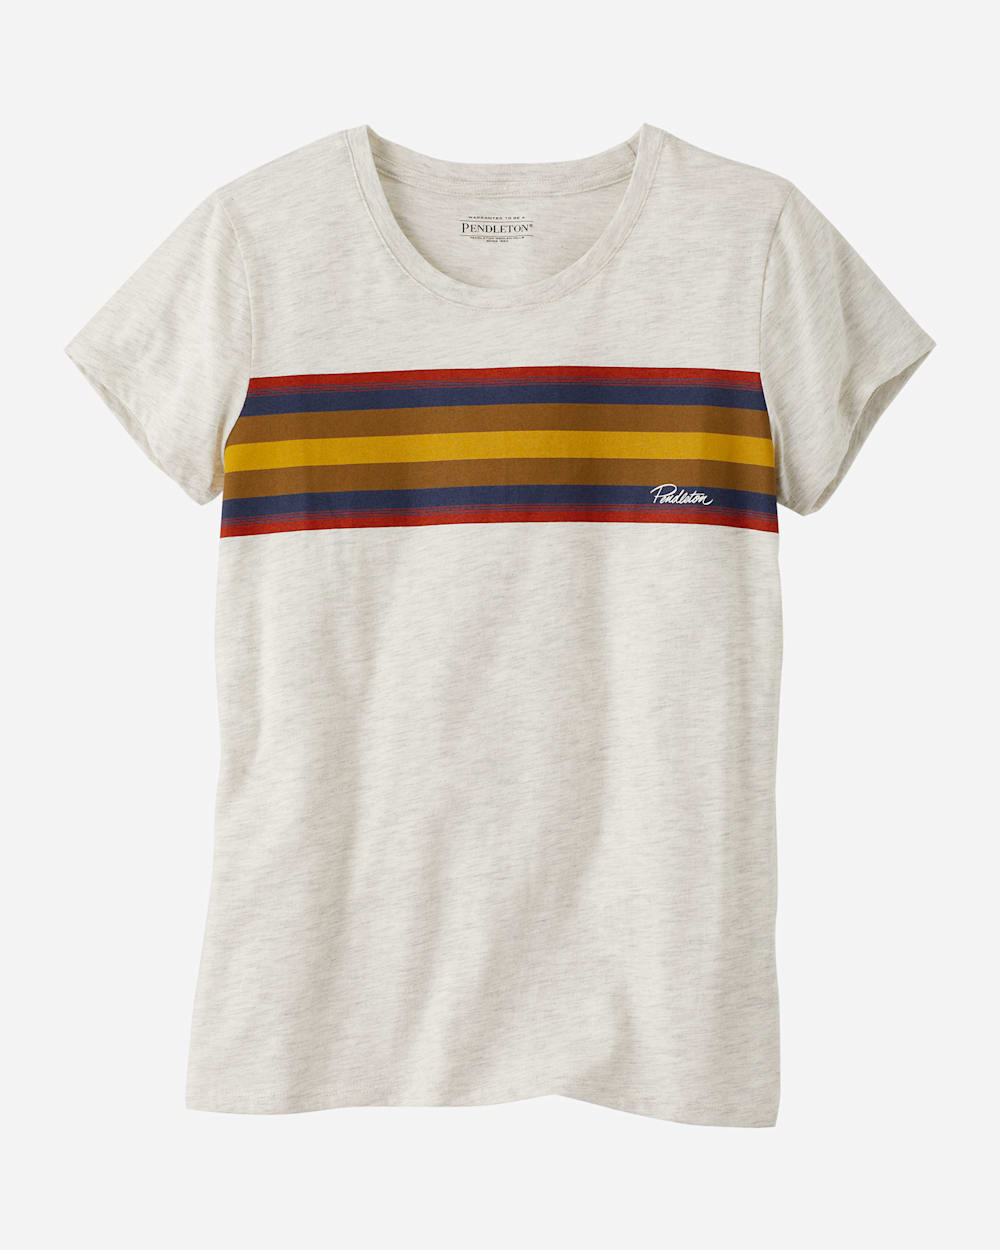 WOMEN'S NATIONAL PARK STRIPE TEE IN LIGHT TAN ZION image number 1